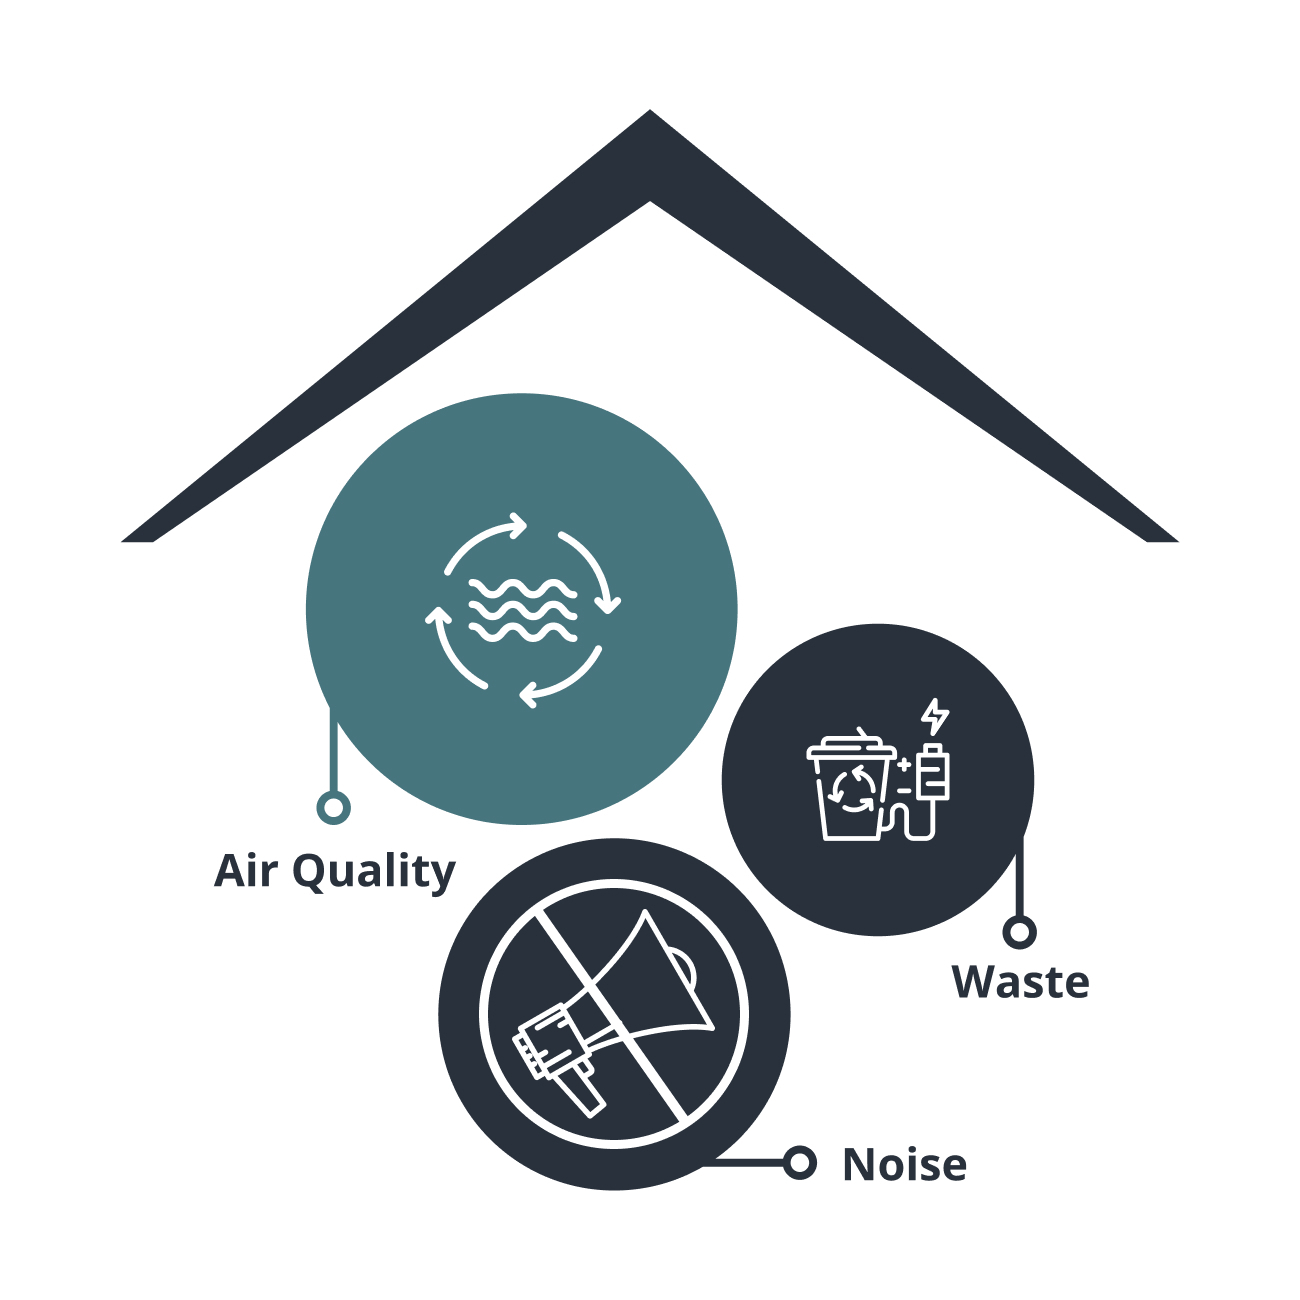 Air quality material waste quiet 1